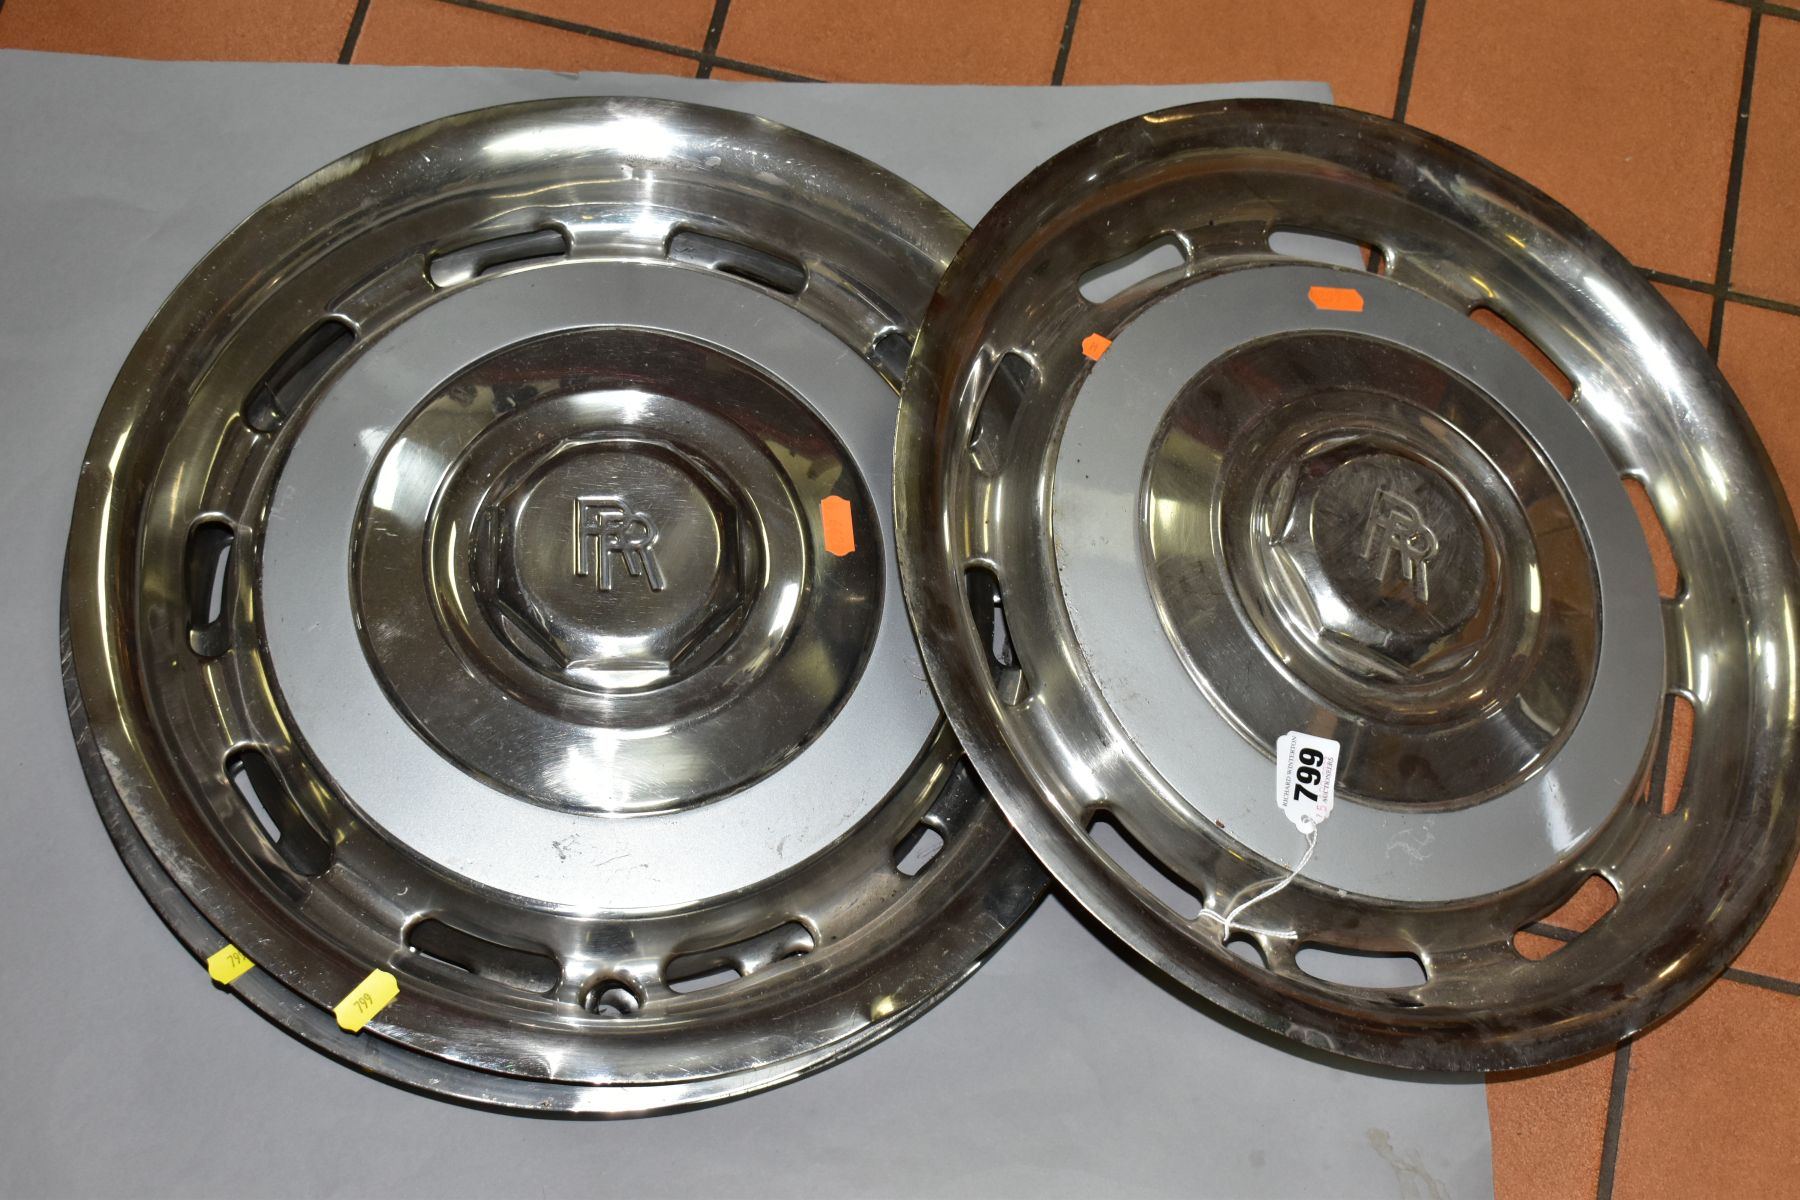 A SET OF FOUR CHROME ROLLS ROYCE HUB CAPS, diameter 42.5cm, with light grey band and central Rolls